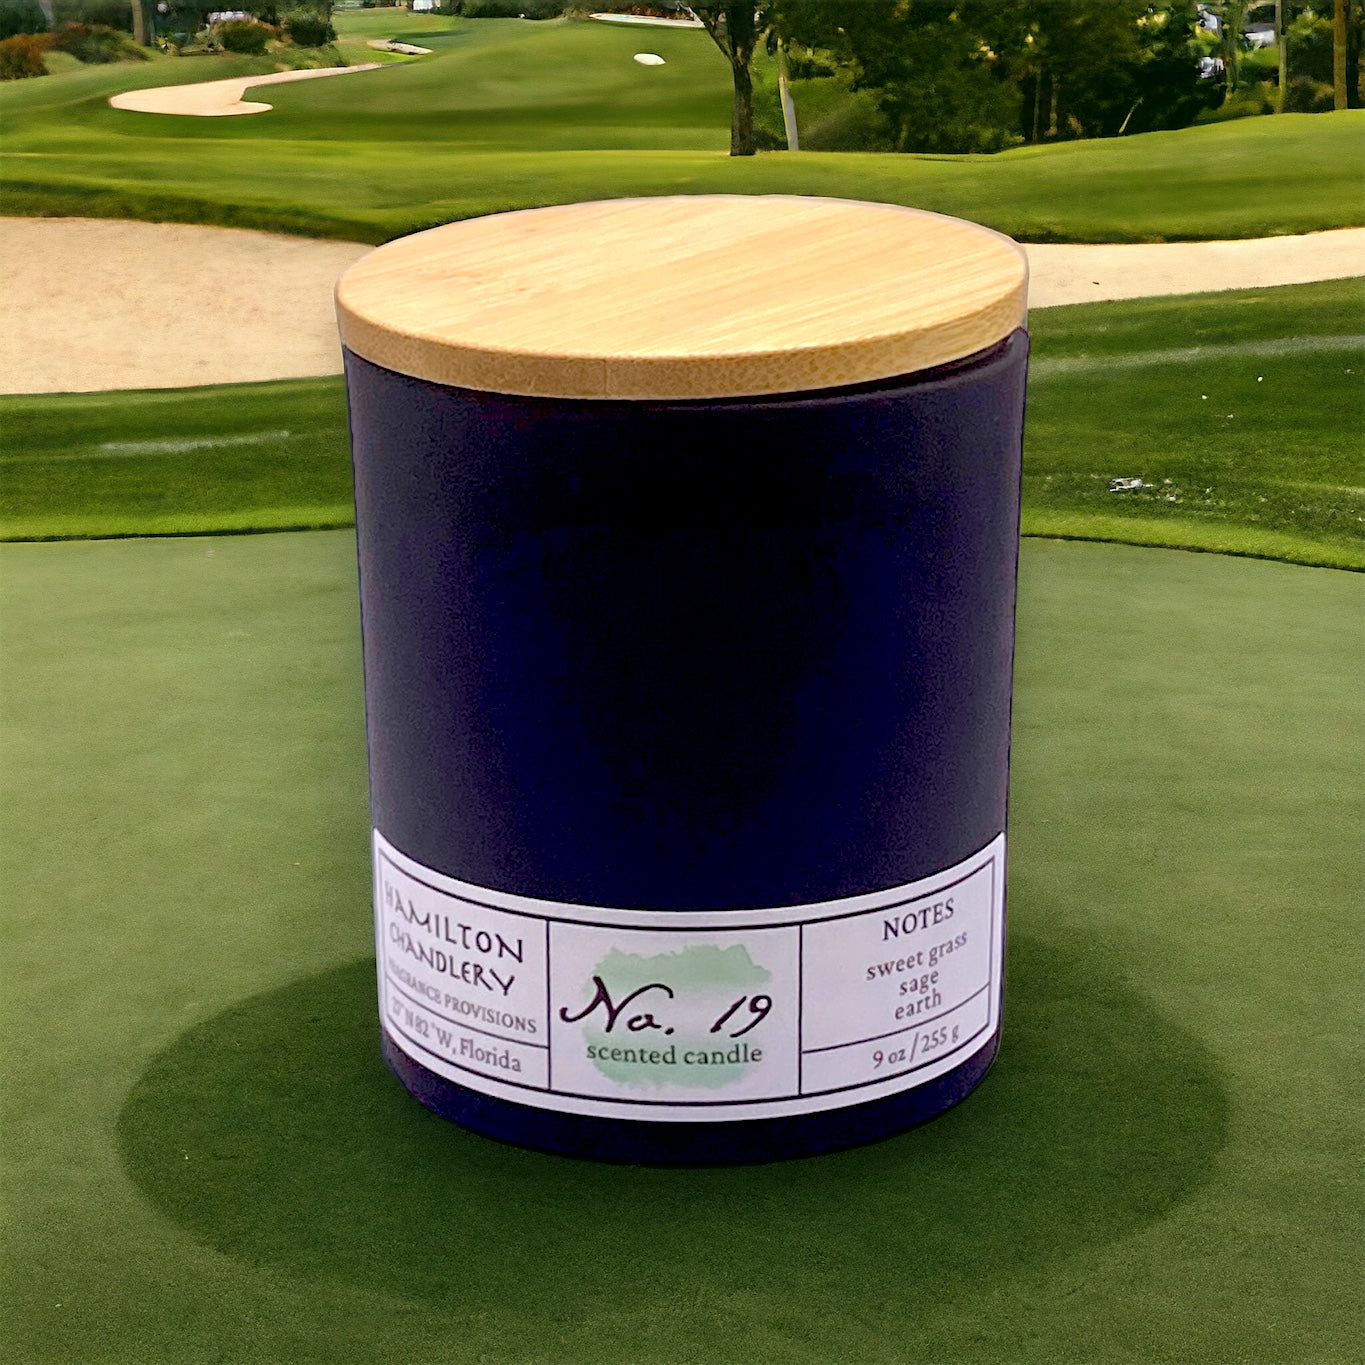 Fragrance No. 19 Blown Glass Candle with Bamboo Lid in Golf Course Setting | Hamilton Chandlery